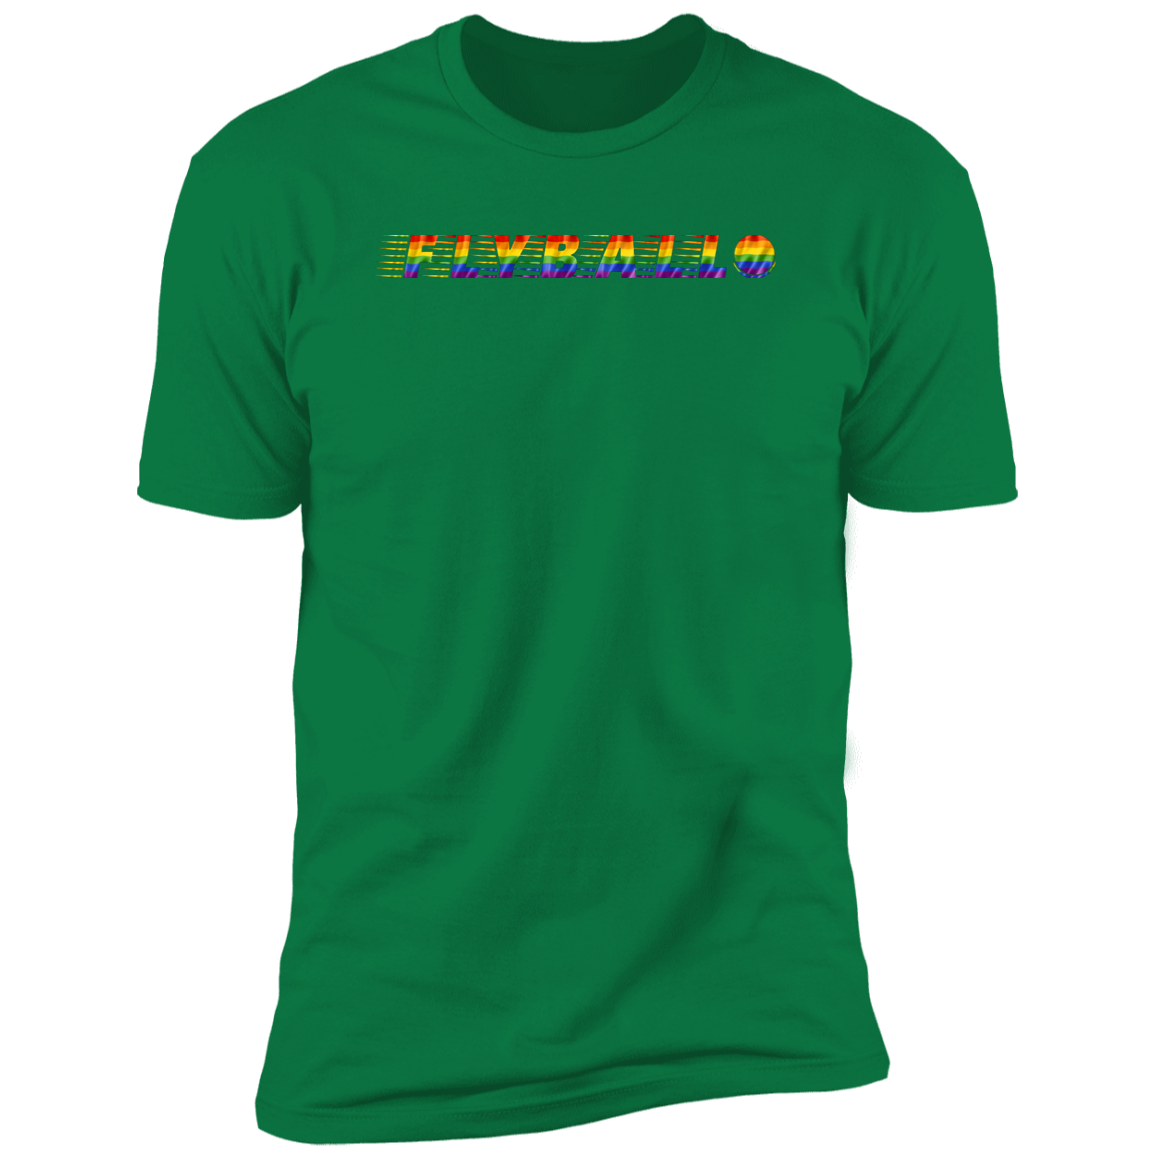 Flyball pride t-shirt, dog pride dog flyball shirt for humans, in kelly green